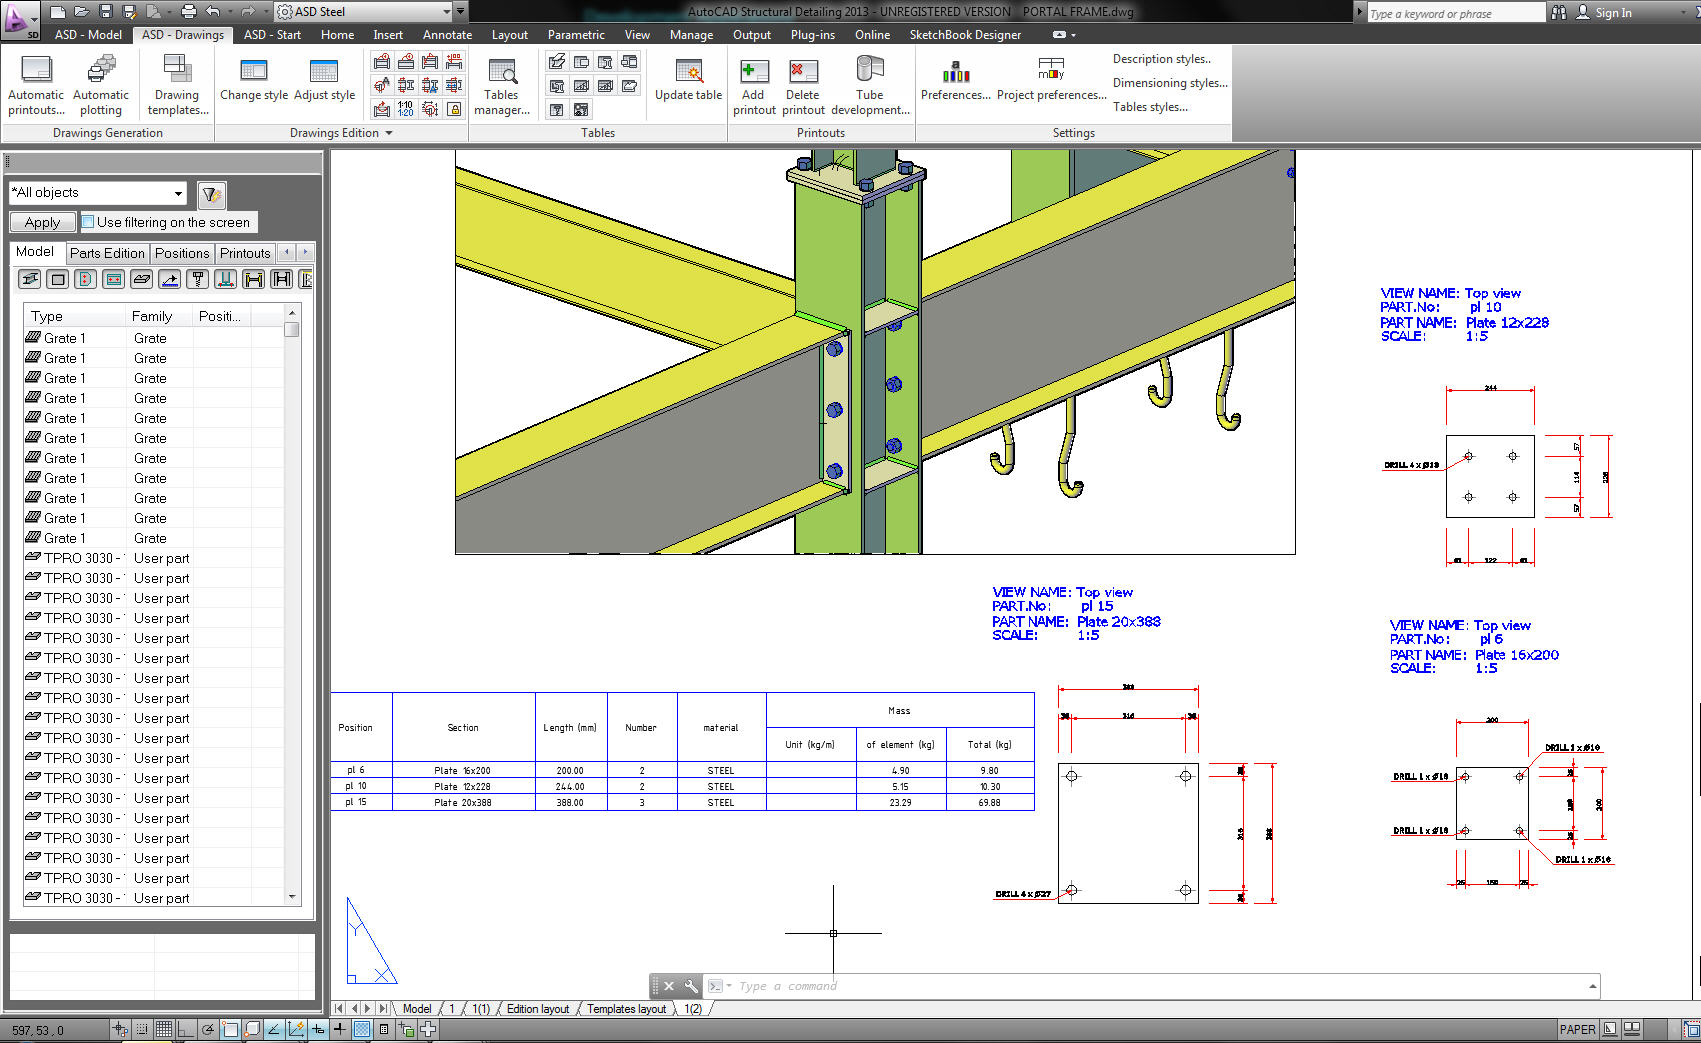 autocad drawing details of steel structure